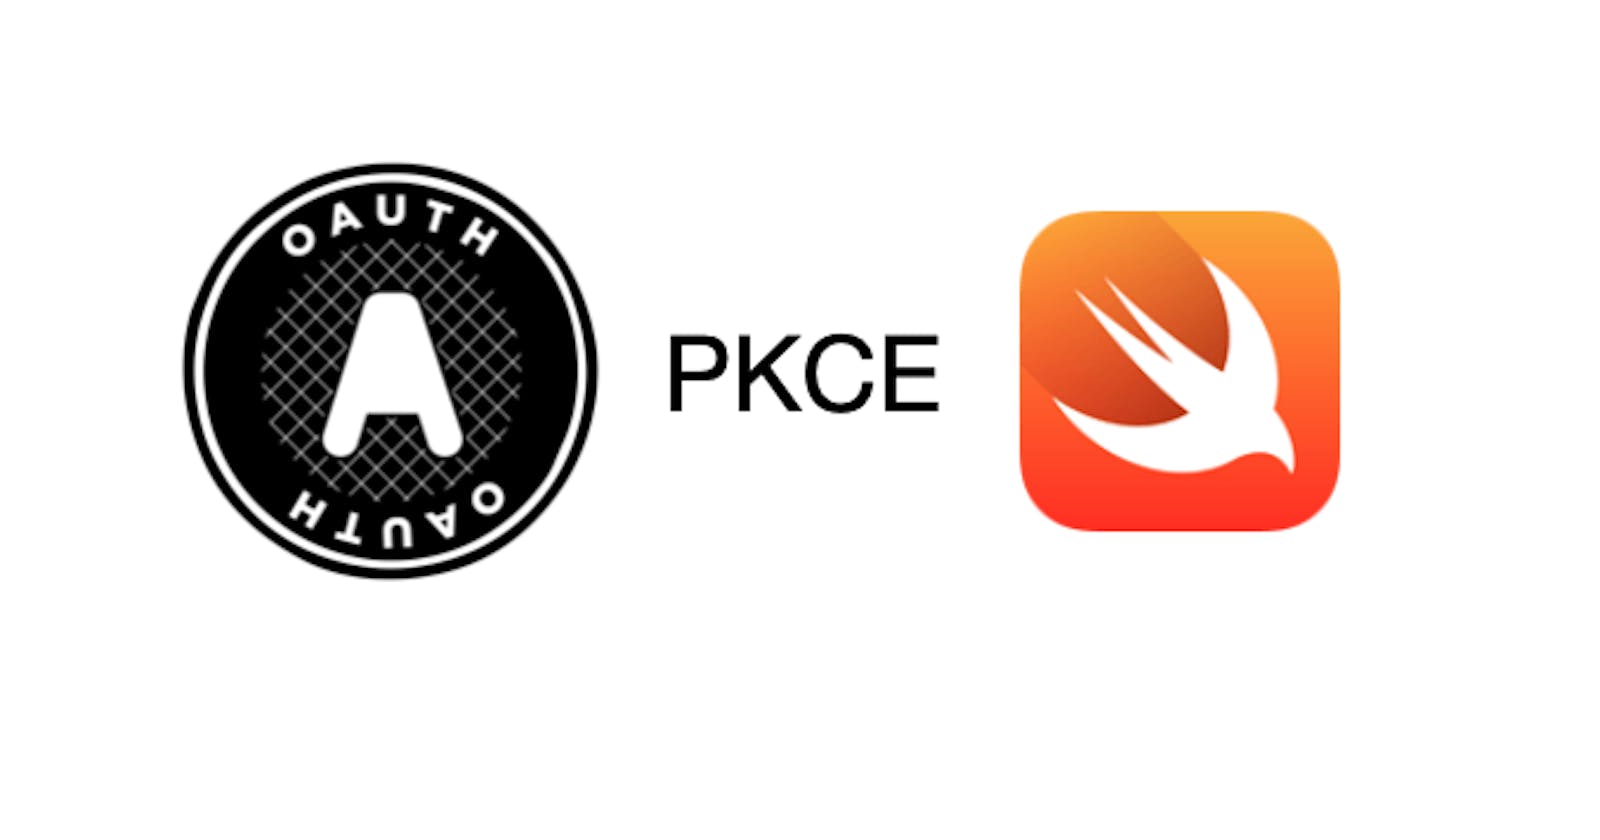 Implement OAuth2 PKCE in Swift and test with Auth0 authorization server